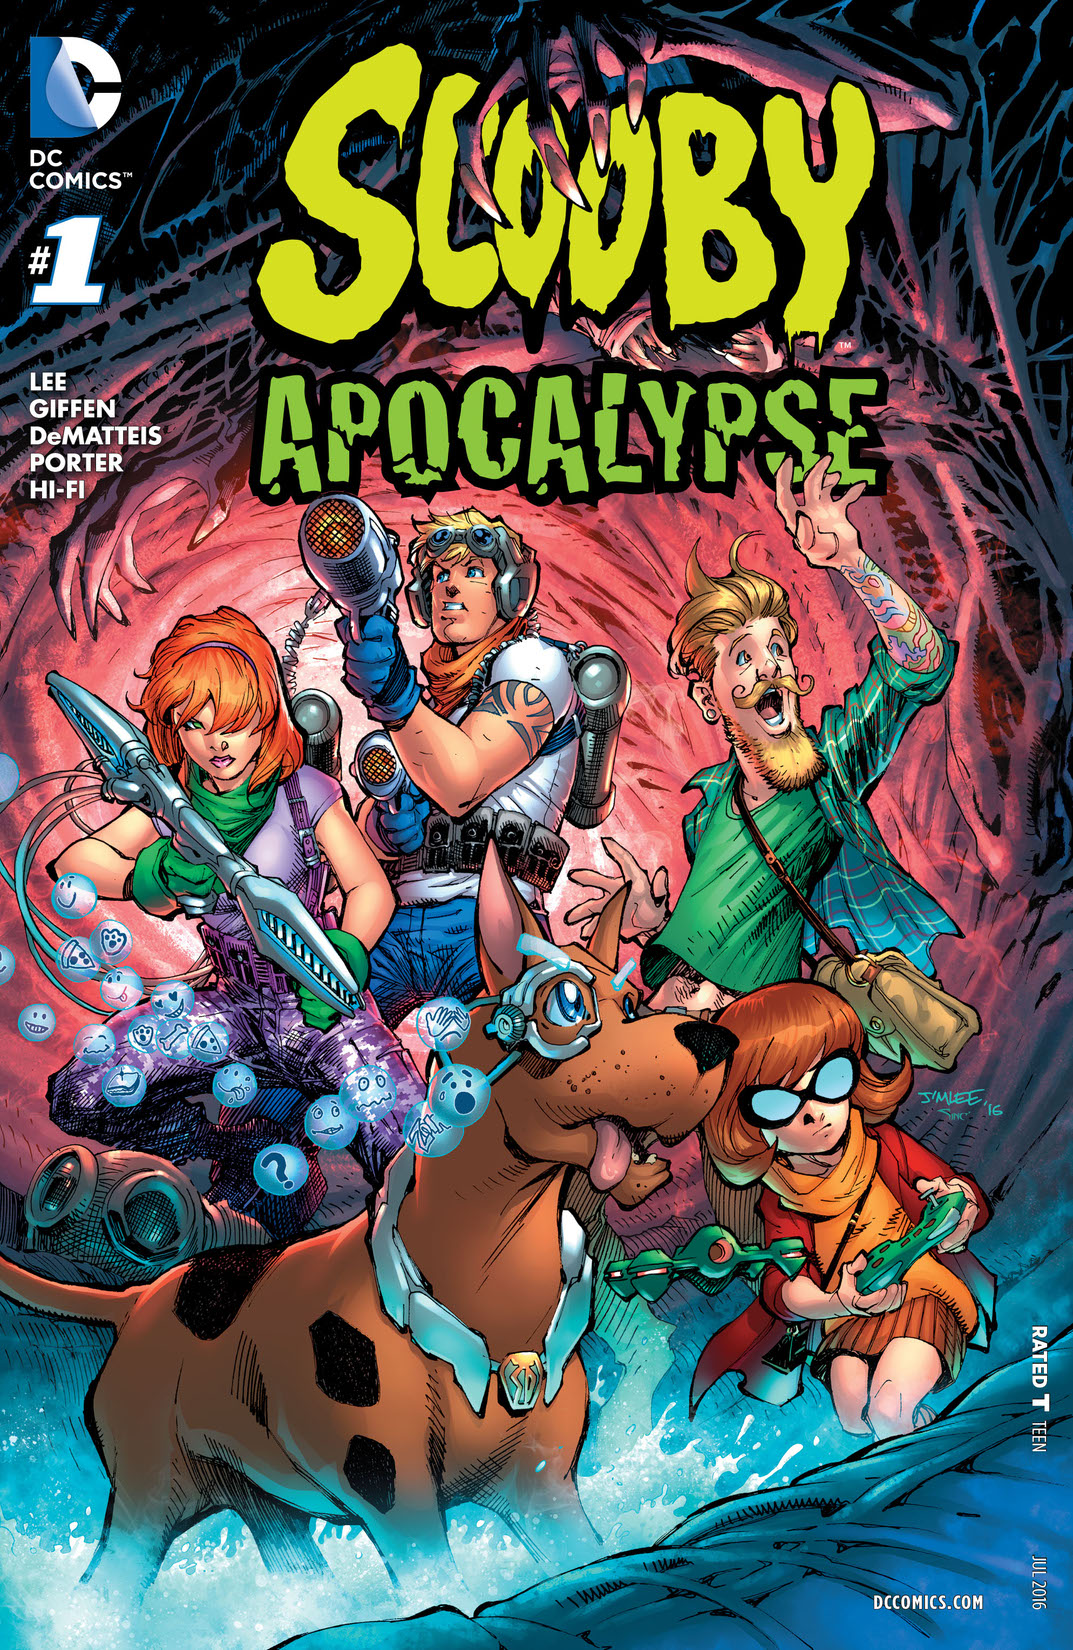 Scooby Apocalypse #1 preview images